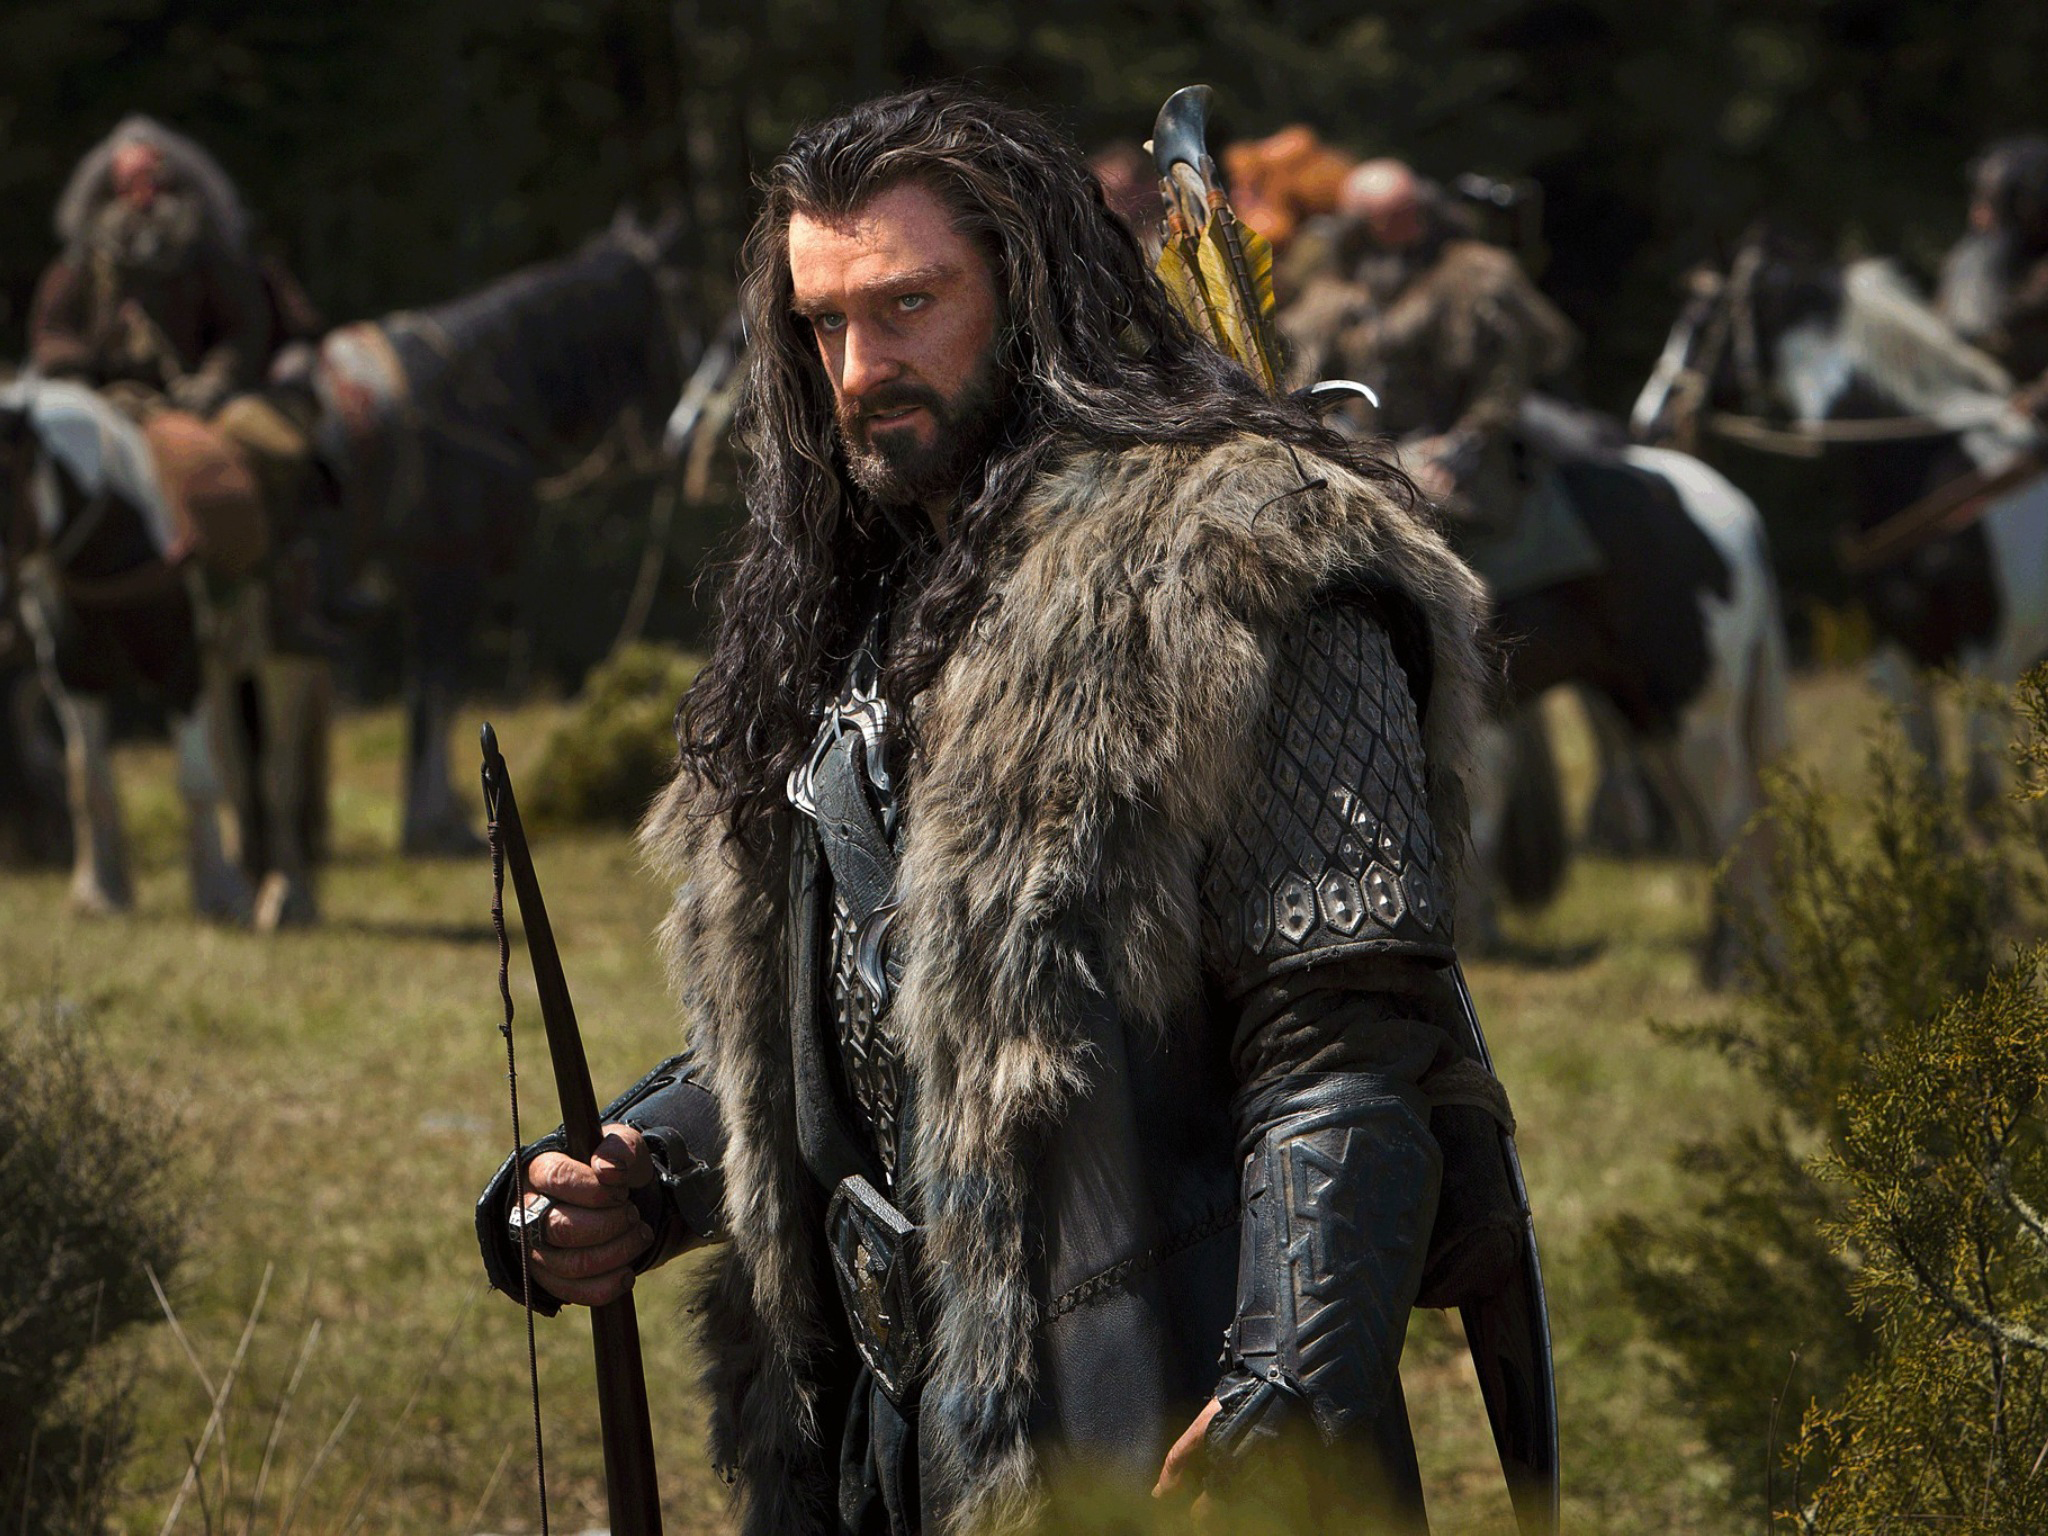 5 New Thorin Oakenshield Images in High-Res | Heirs of Durin